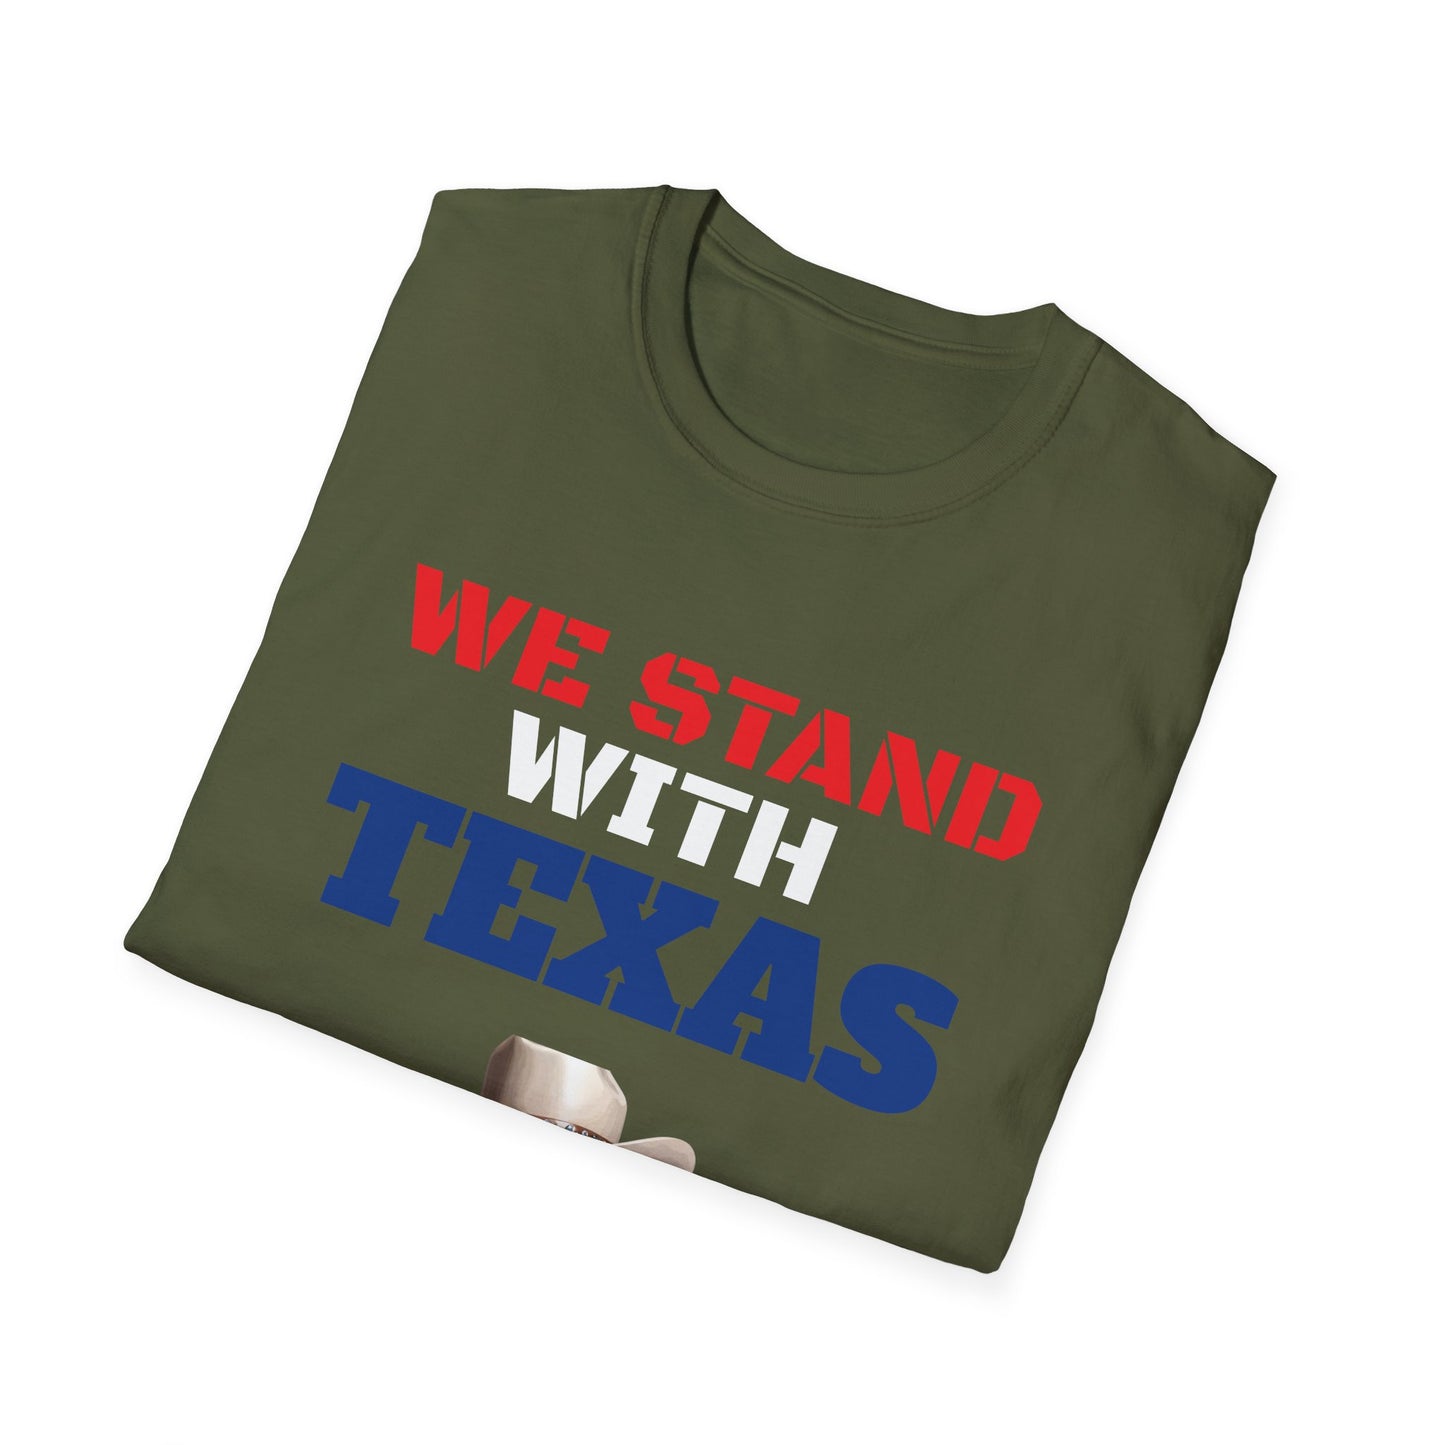 We Stand With Texas Flag Trump 2024 Unisex Softstyle T-Shirt MAGA